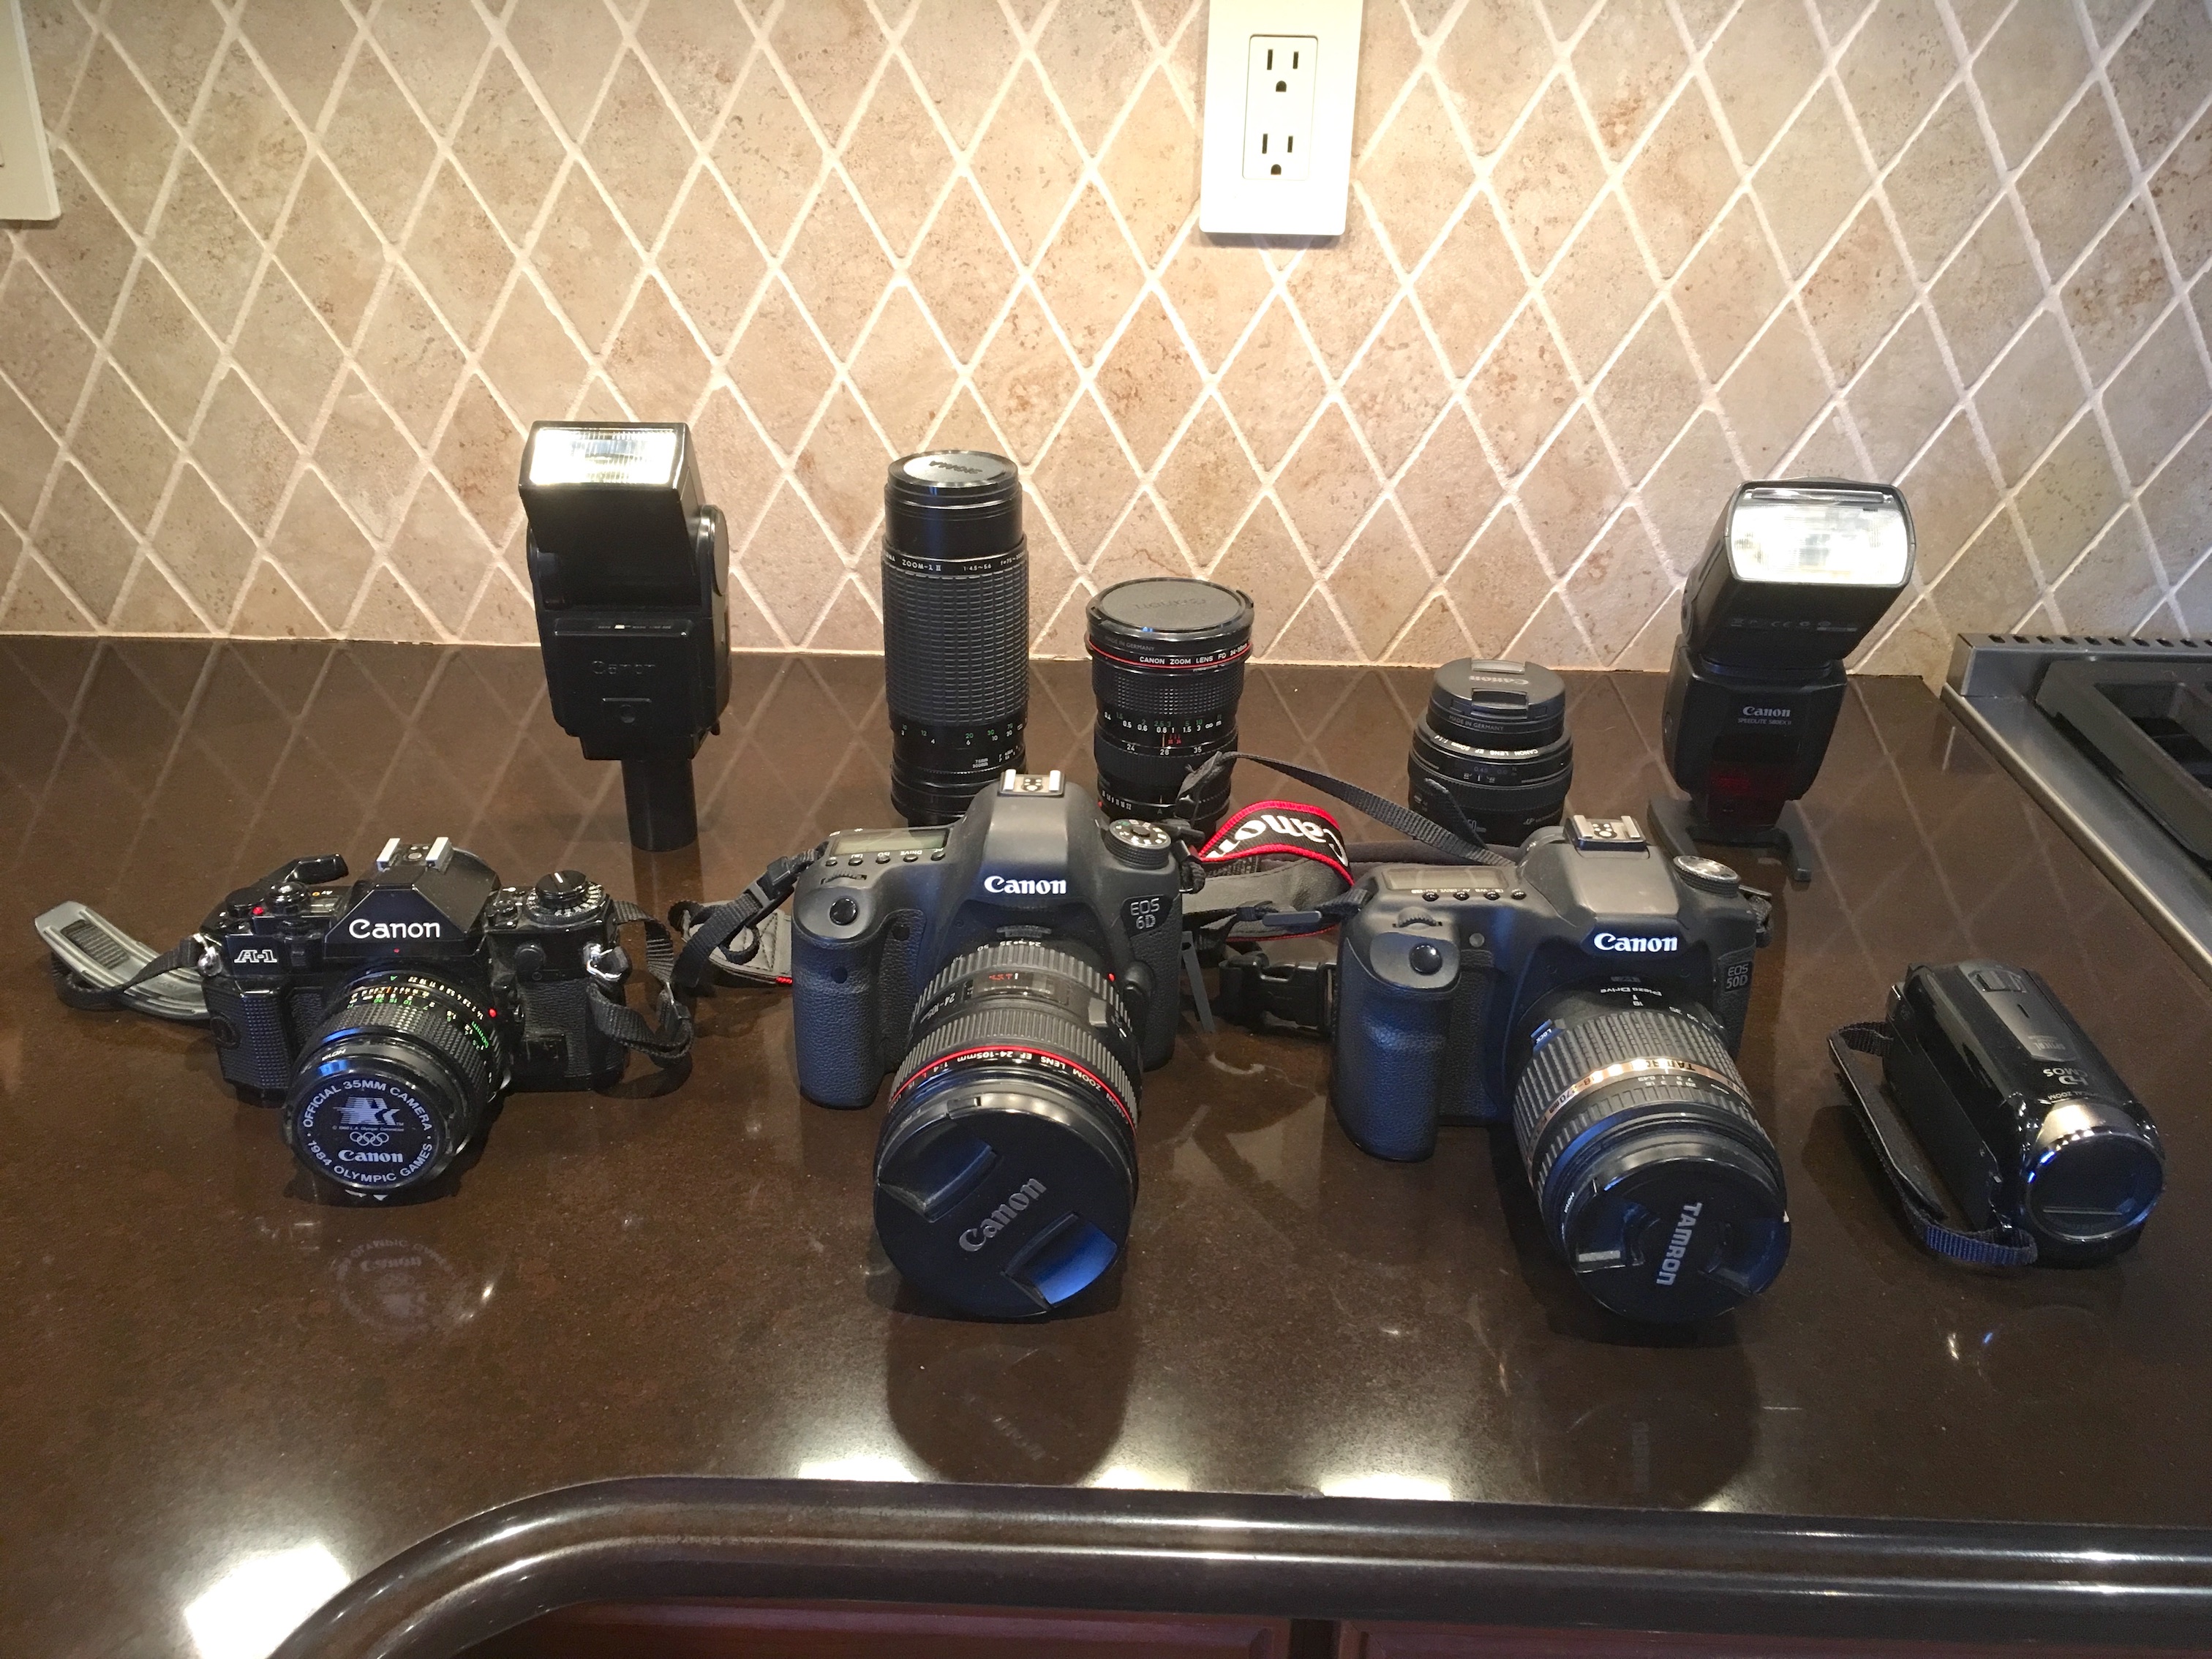 Camera collection